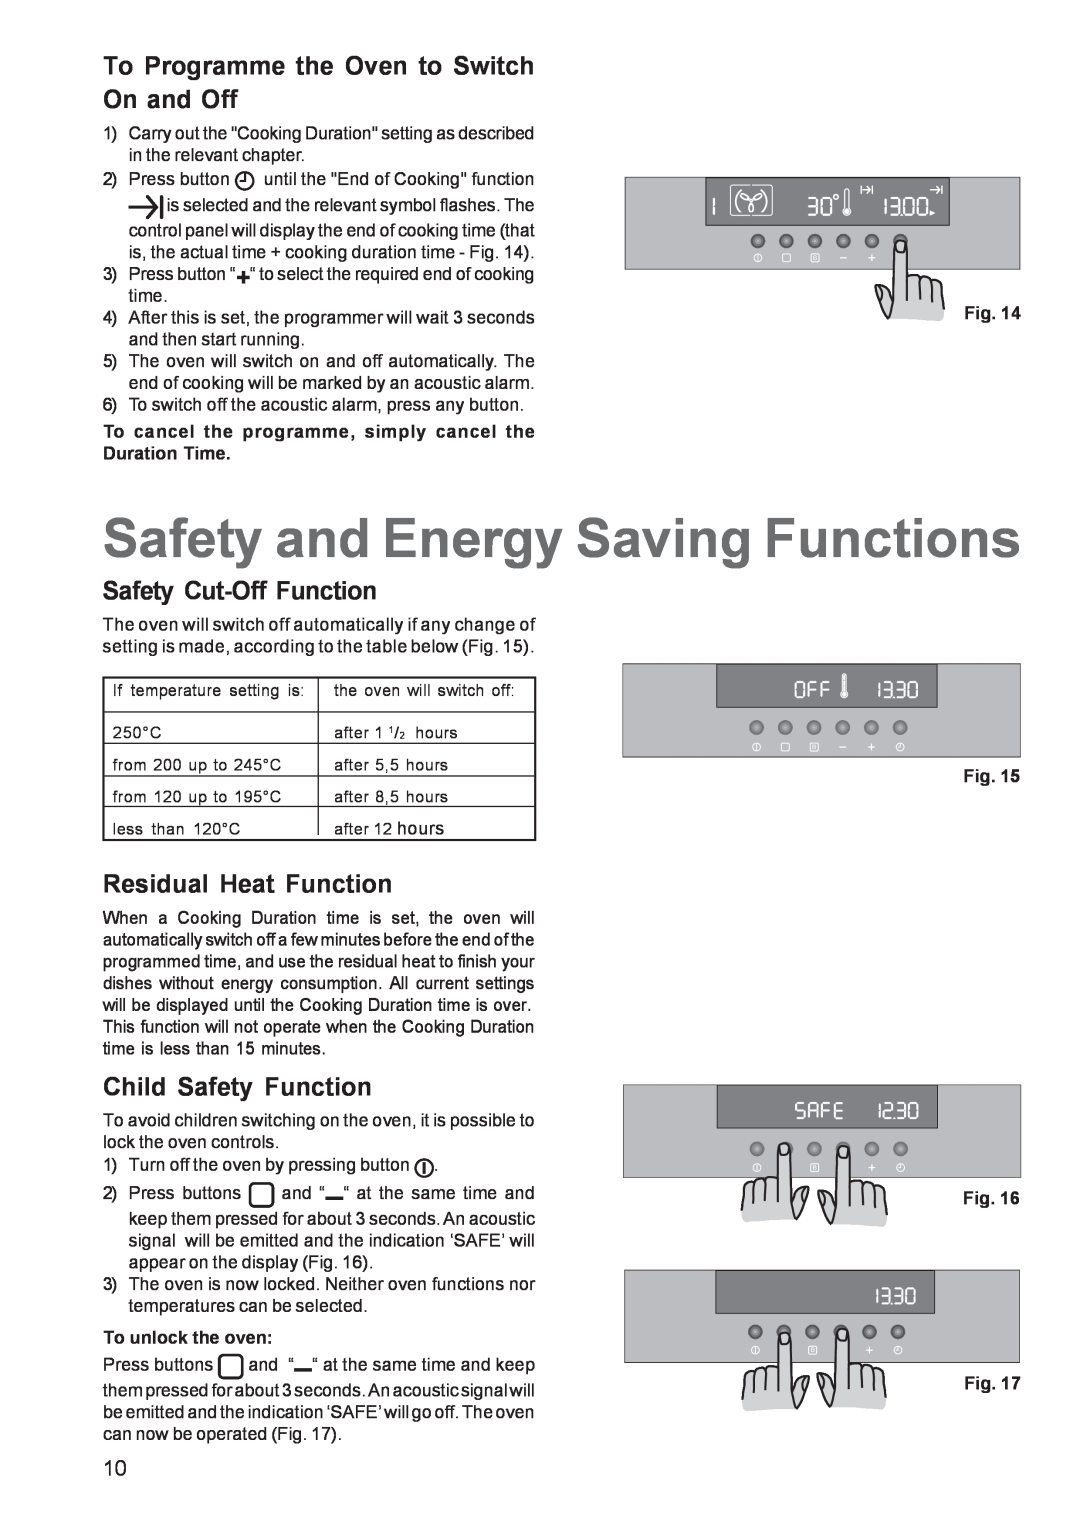 Zanussi ZOB 1060 Safety and Energy Saving Functions, To Programme the Oven to Switch On and Off, Safety Cut-OffFunction 